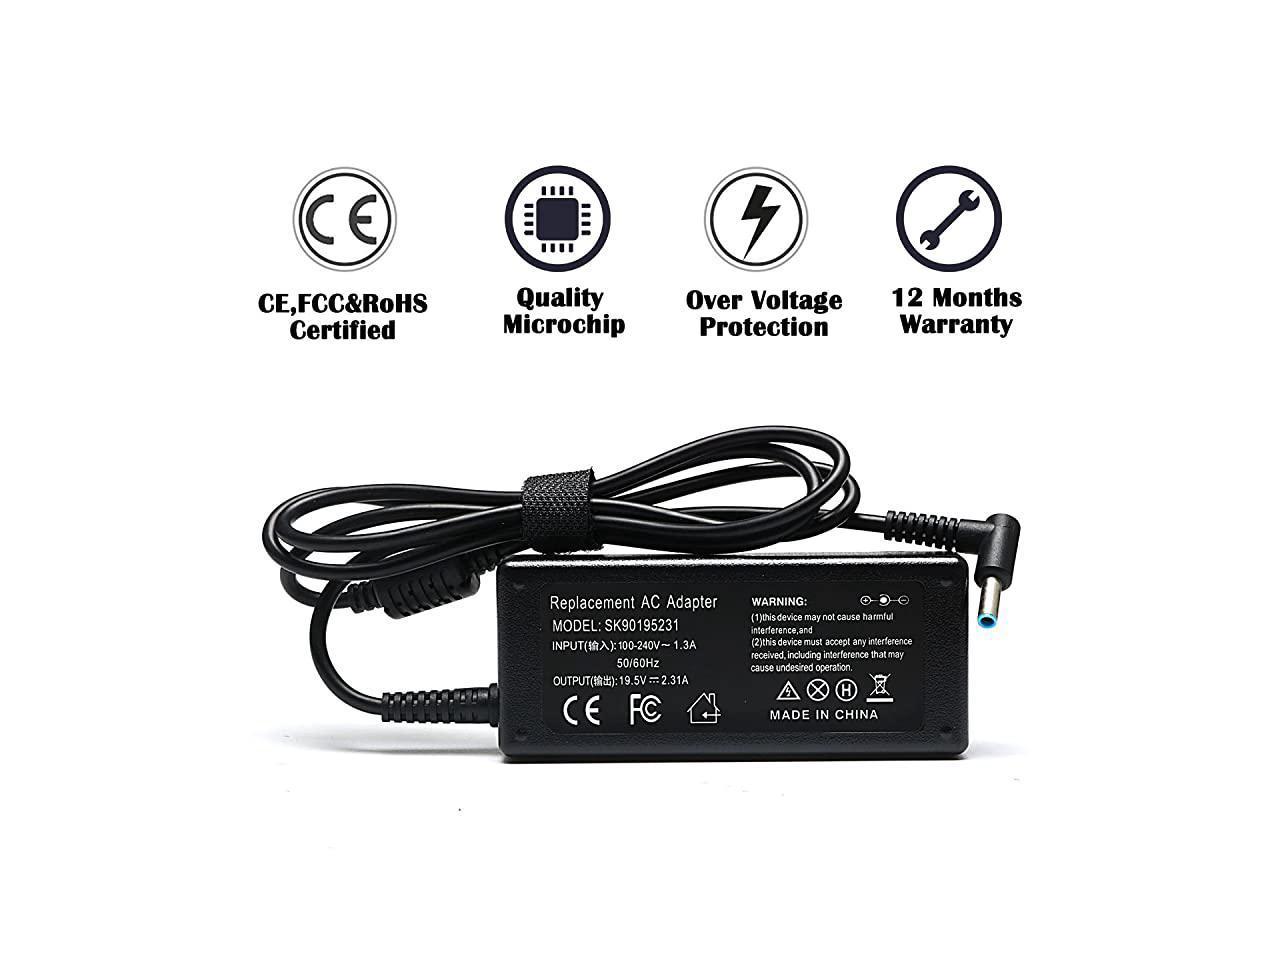 195v 231a Ac Adapter Laptop Charger For Hp Spectre X360 X2 13 15 Pavilion Envy X360 M6 Pn 2490